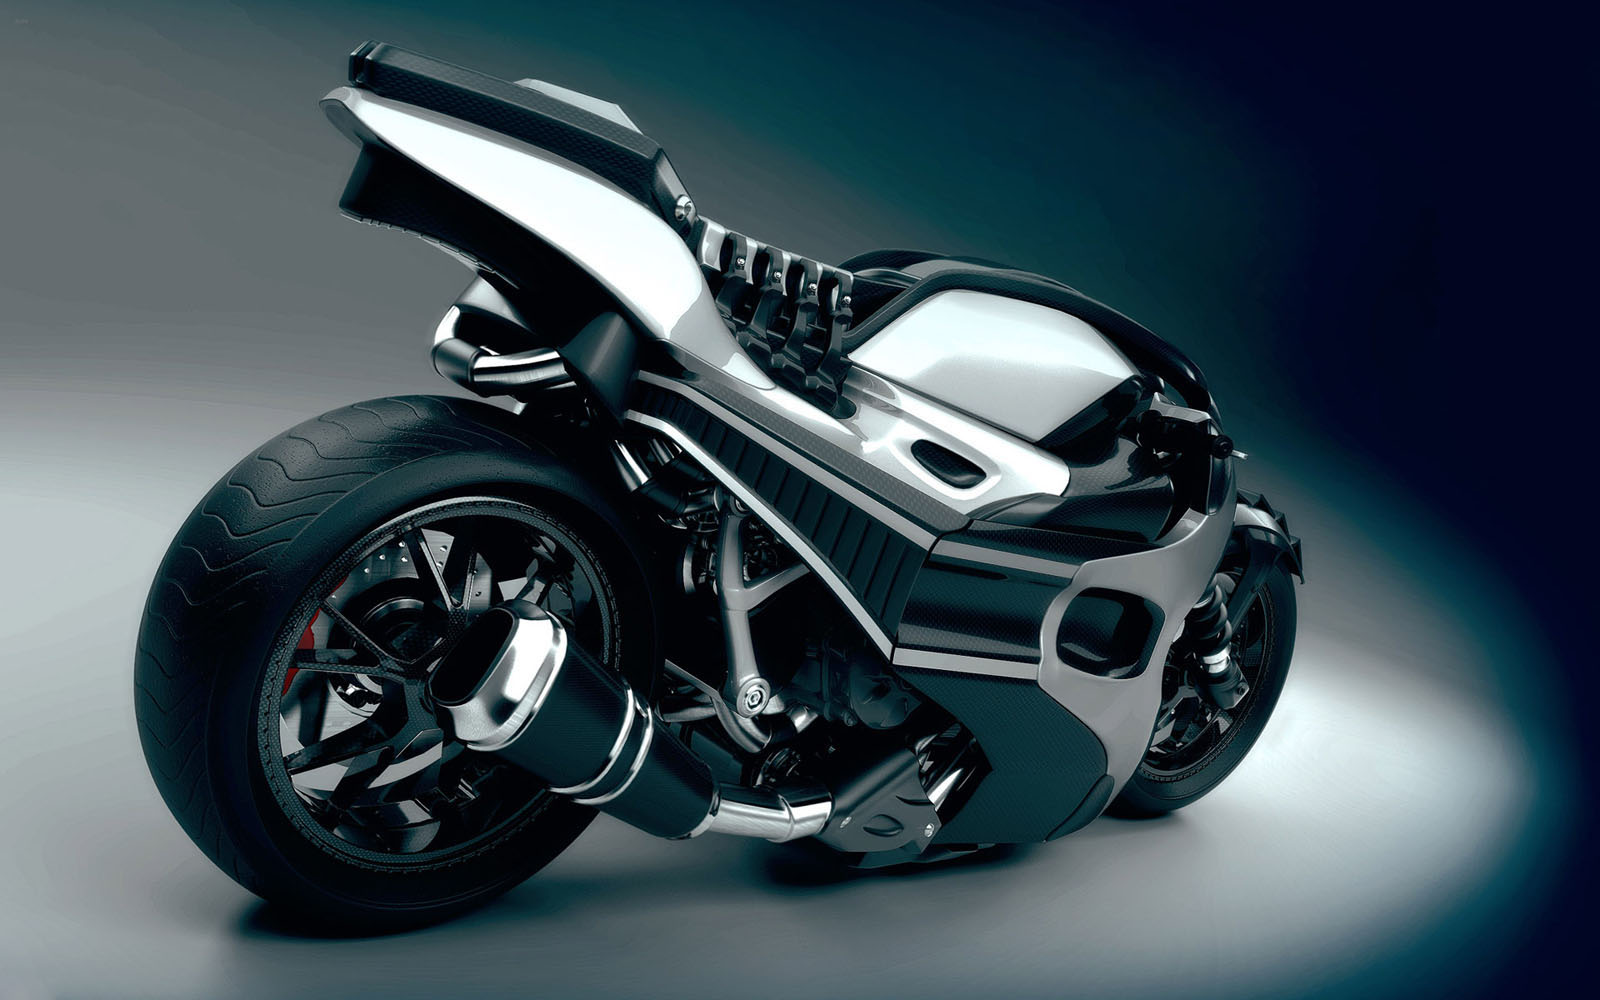 Tag Bike Wallpaper Background Photos Image Andpictures For